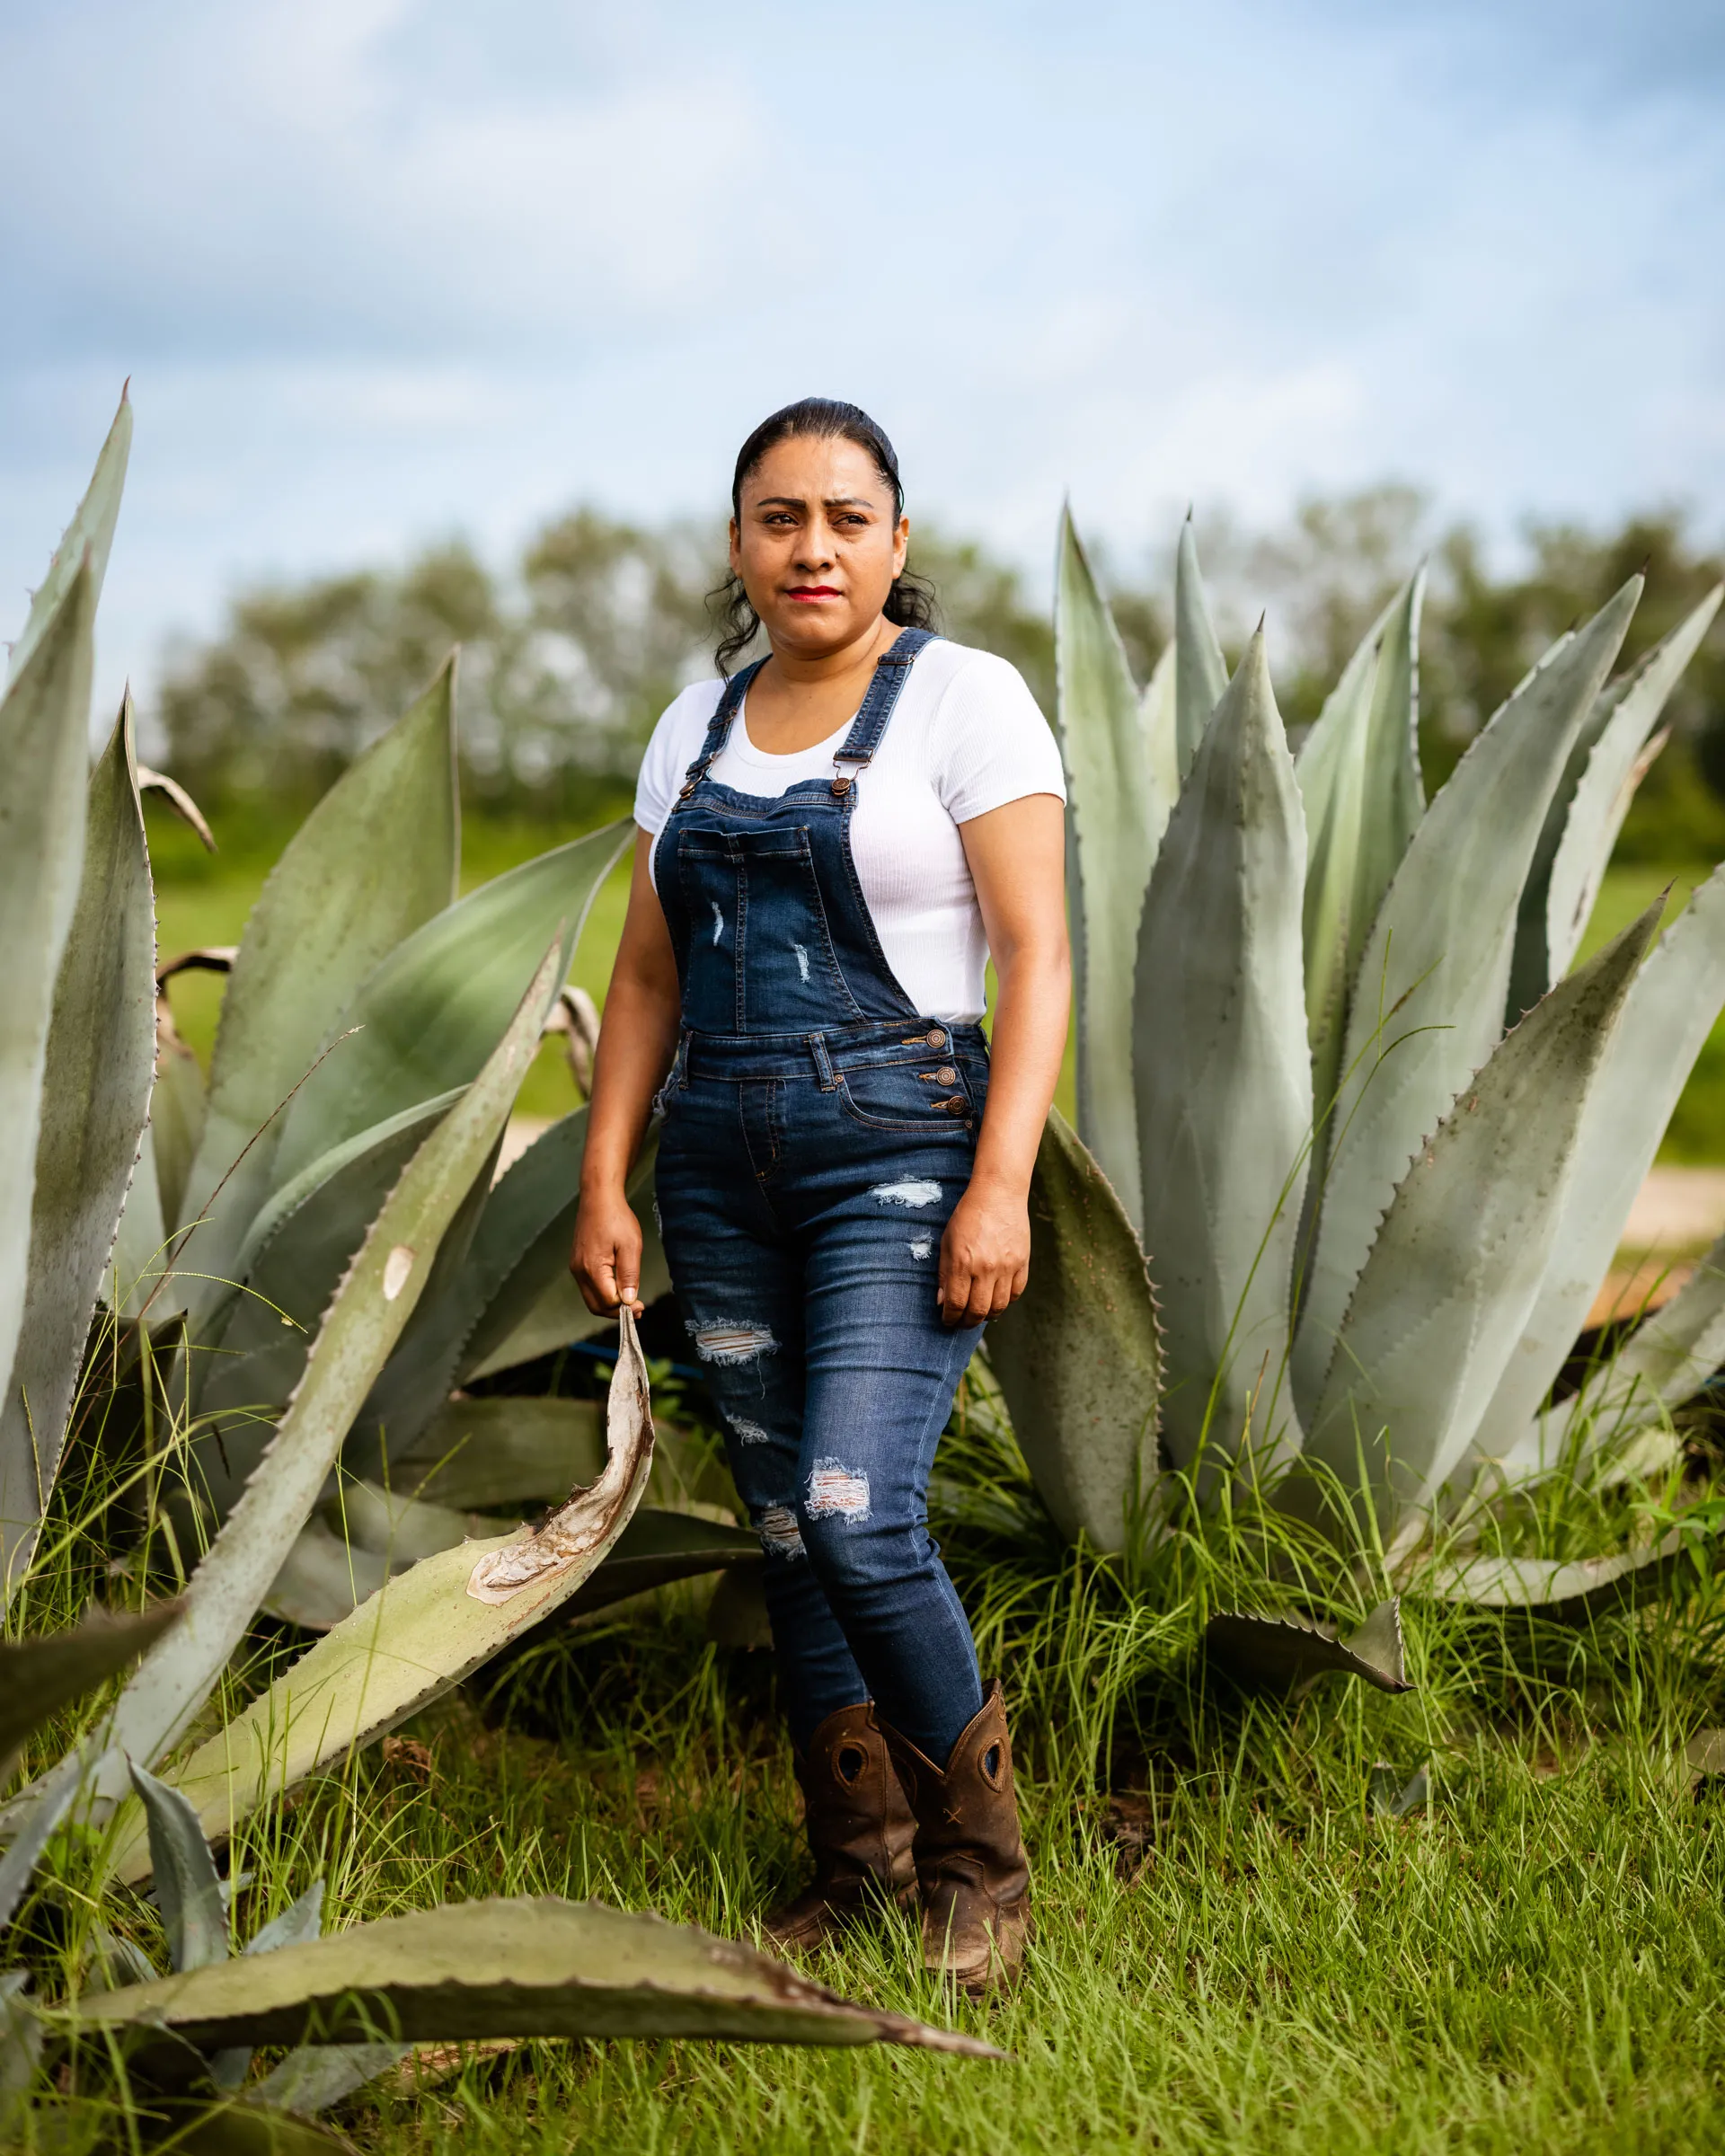 Silvia Moreno Ayala says she loves her work as a field crew leader for a South Georgia family-owned farm, yet her doctor has warned her that this type of work is a threat to her health. Photo: José Ibarra Rizo / TIME